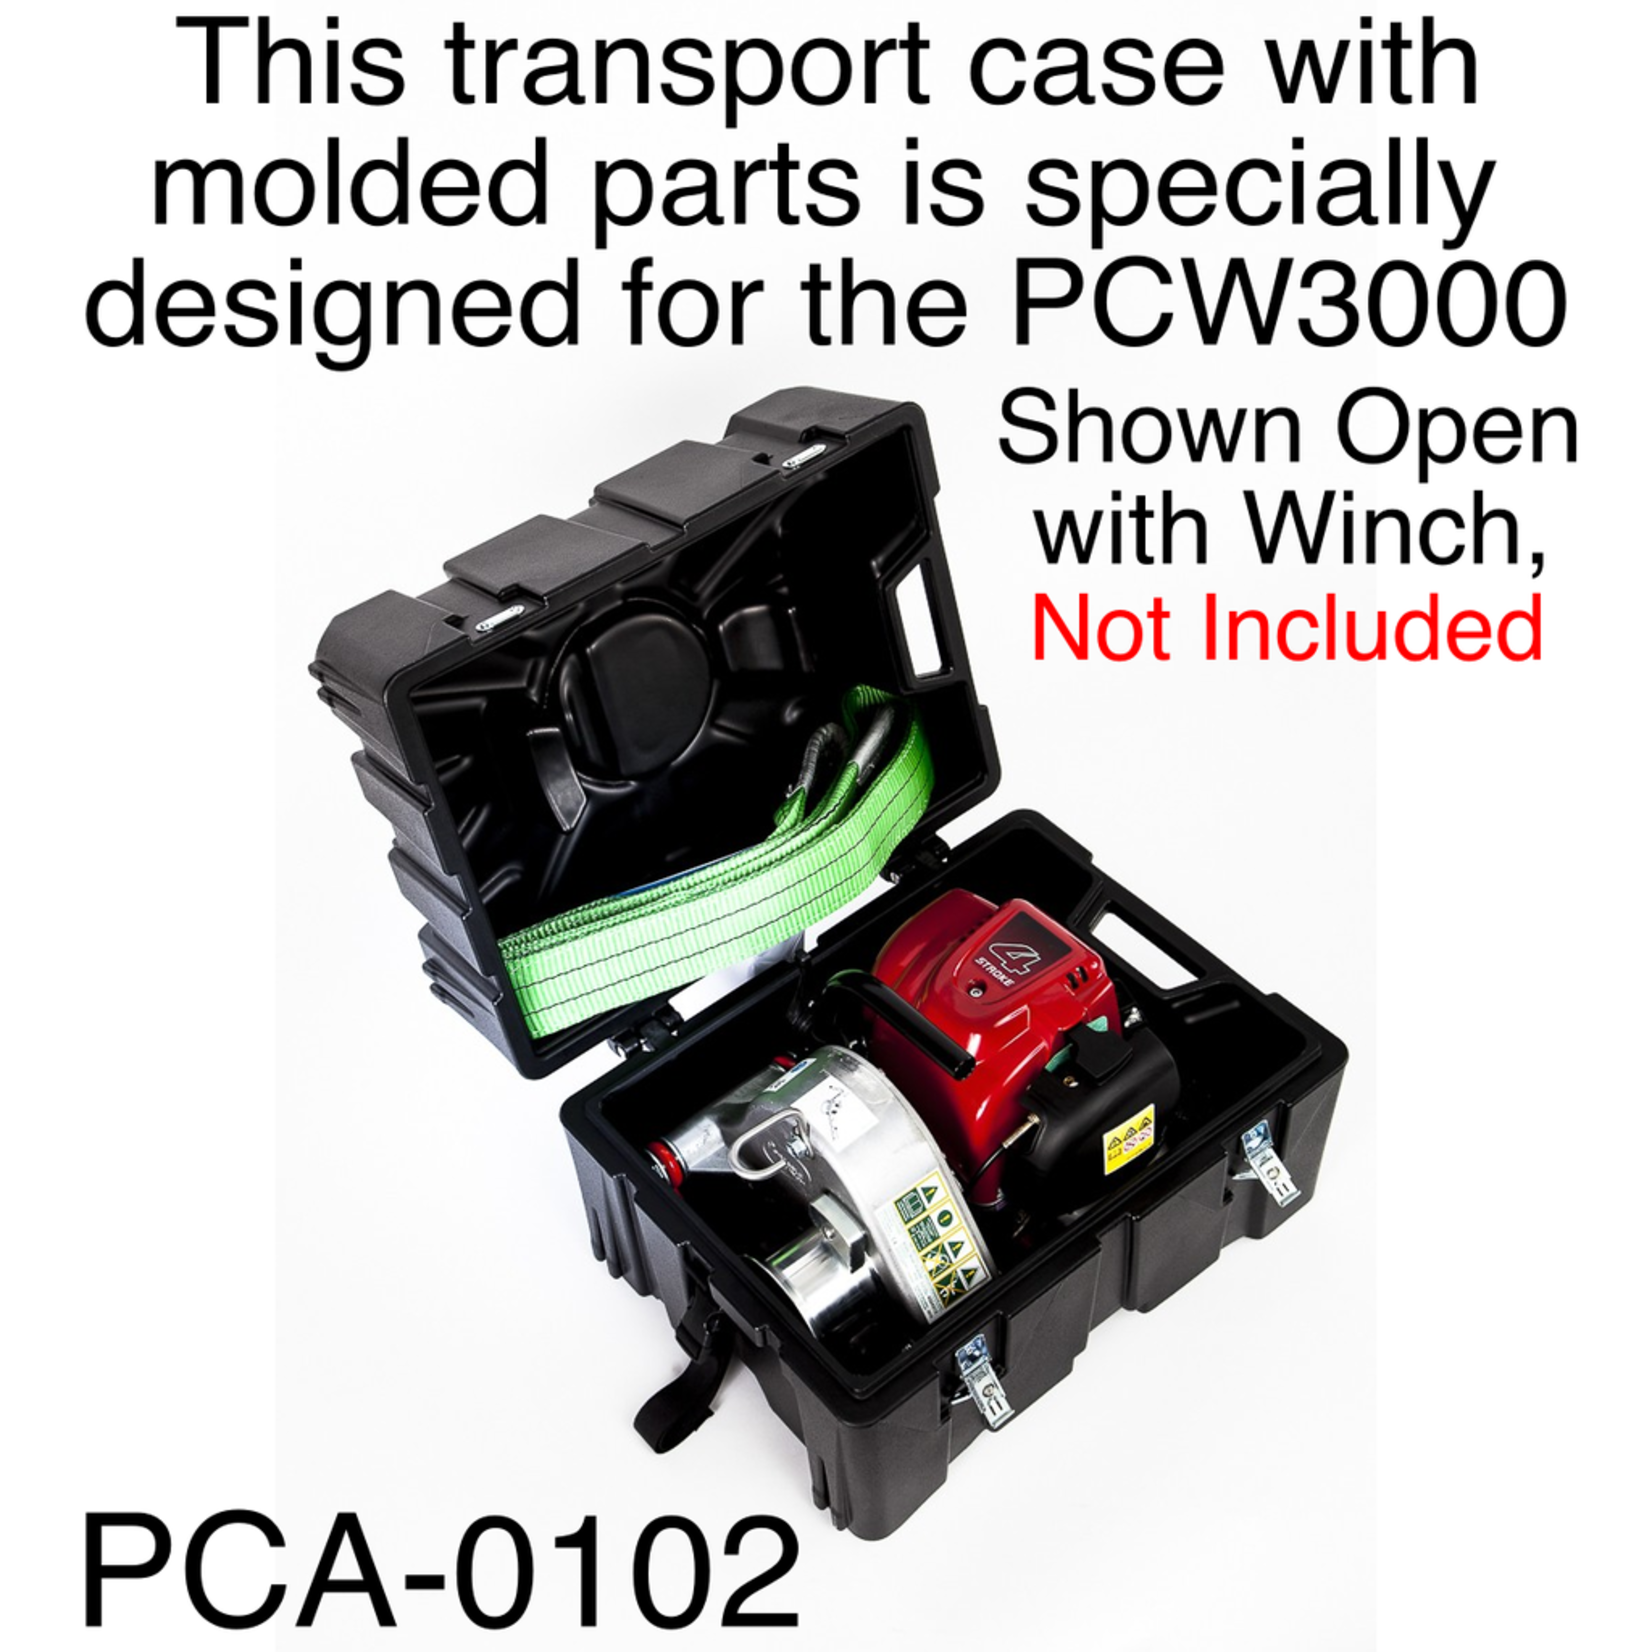 PORTABLE WINCH CO. Transport Case With Molded Parts Specially Designed For The PCW3000 Winch